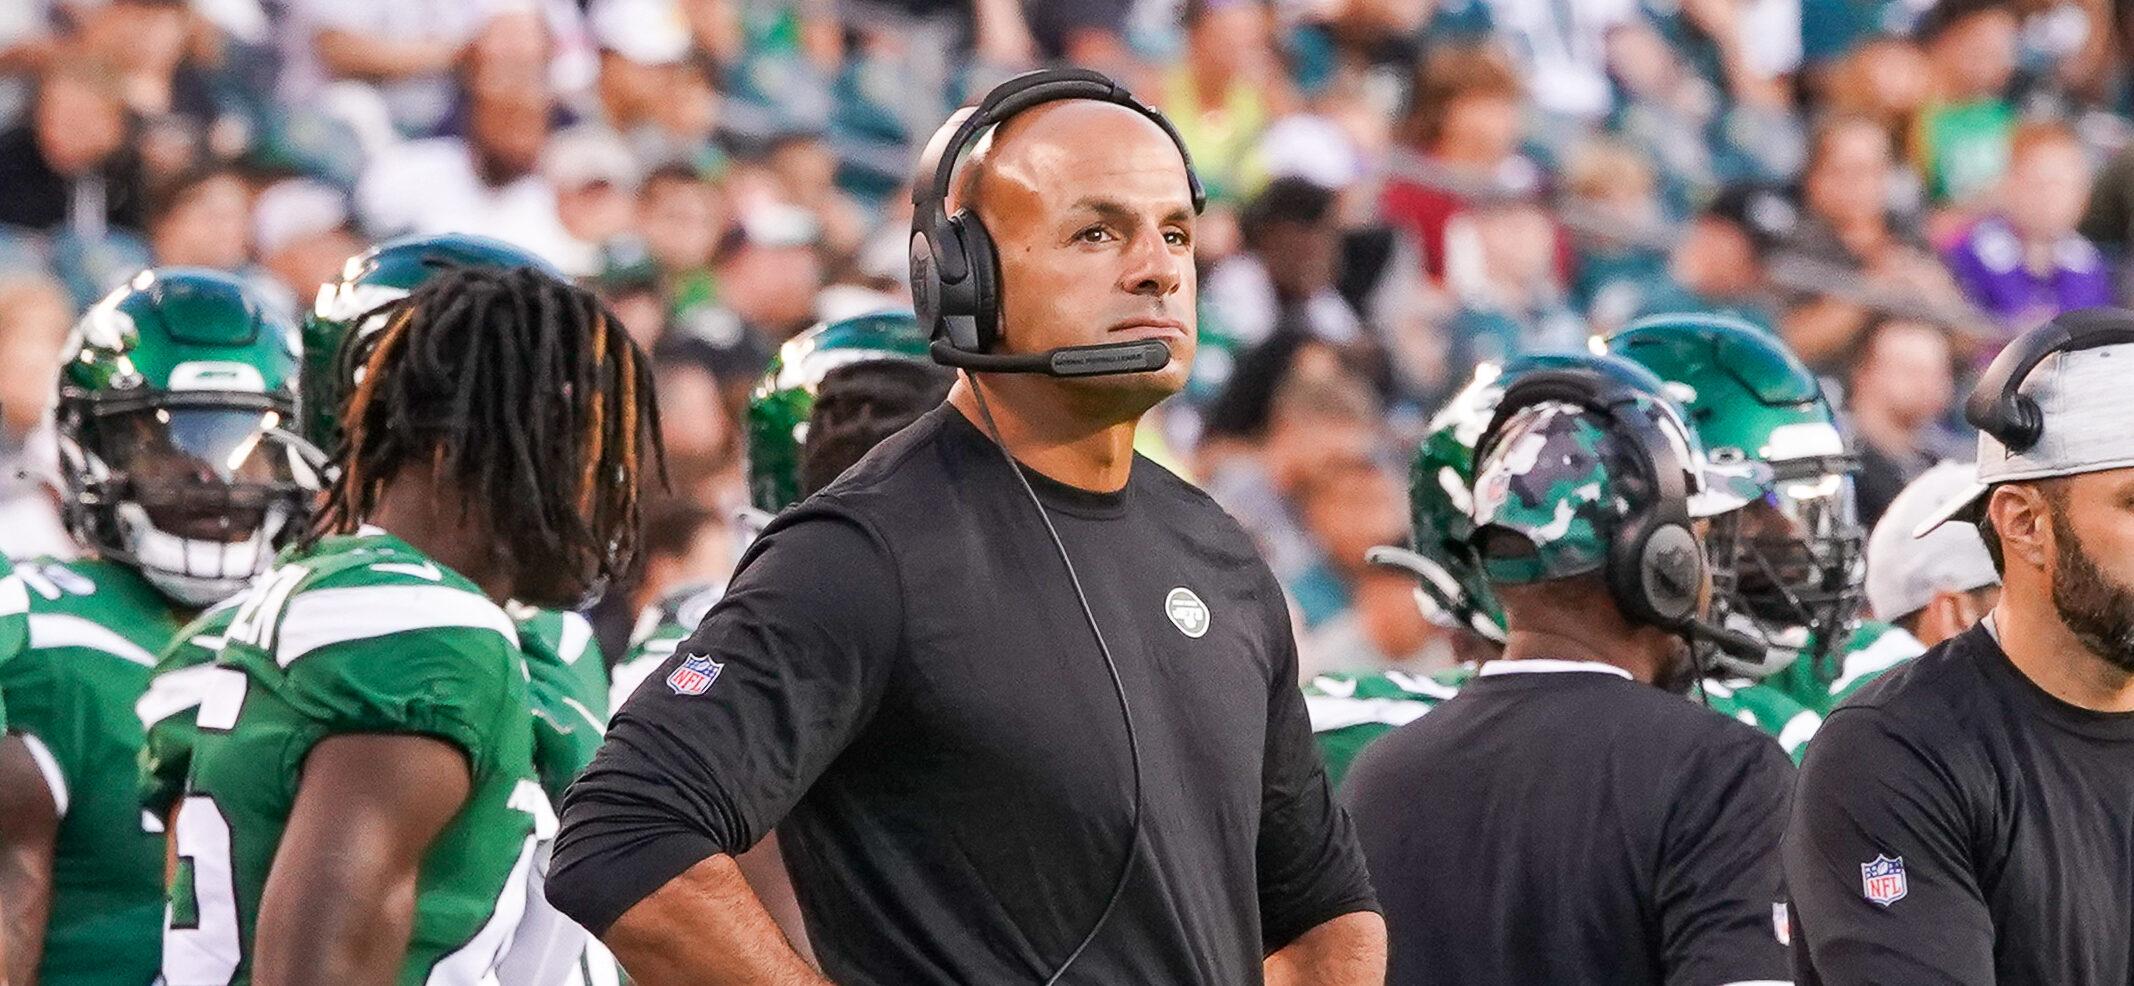 Jets Head Coach Believes Team Has All Elements To Beat Cowboys